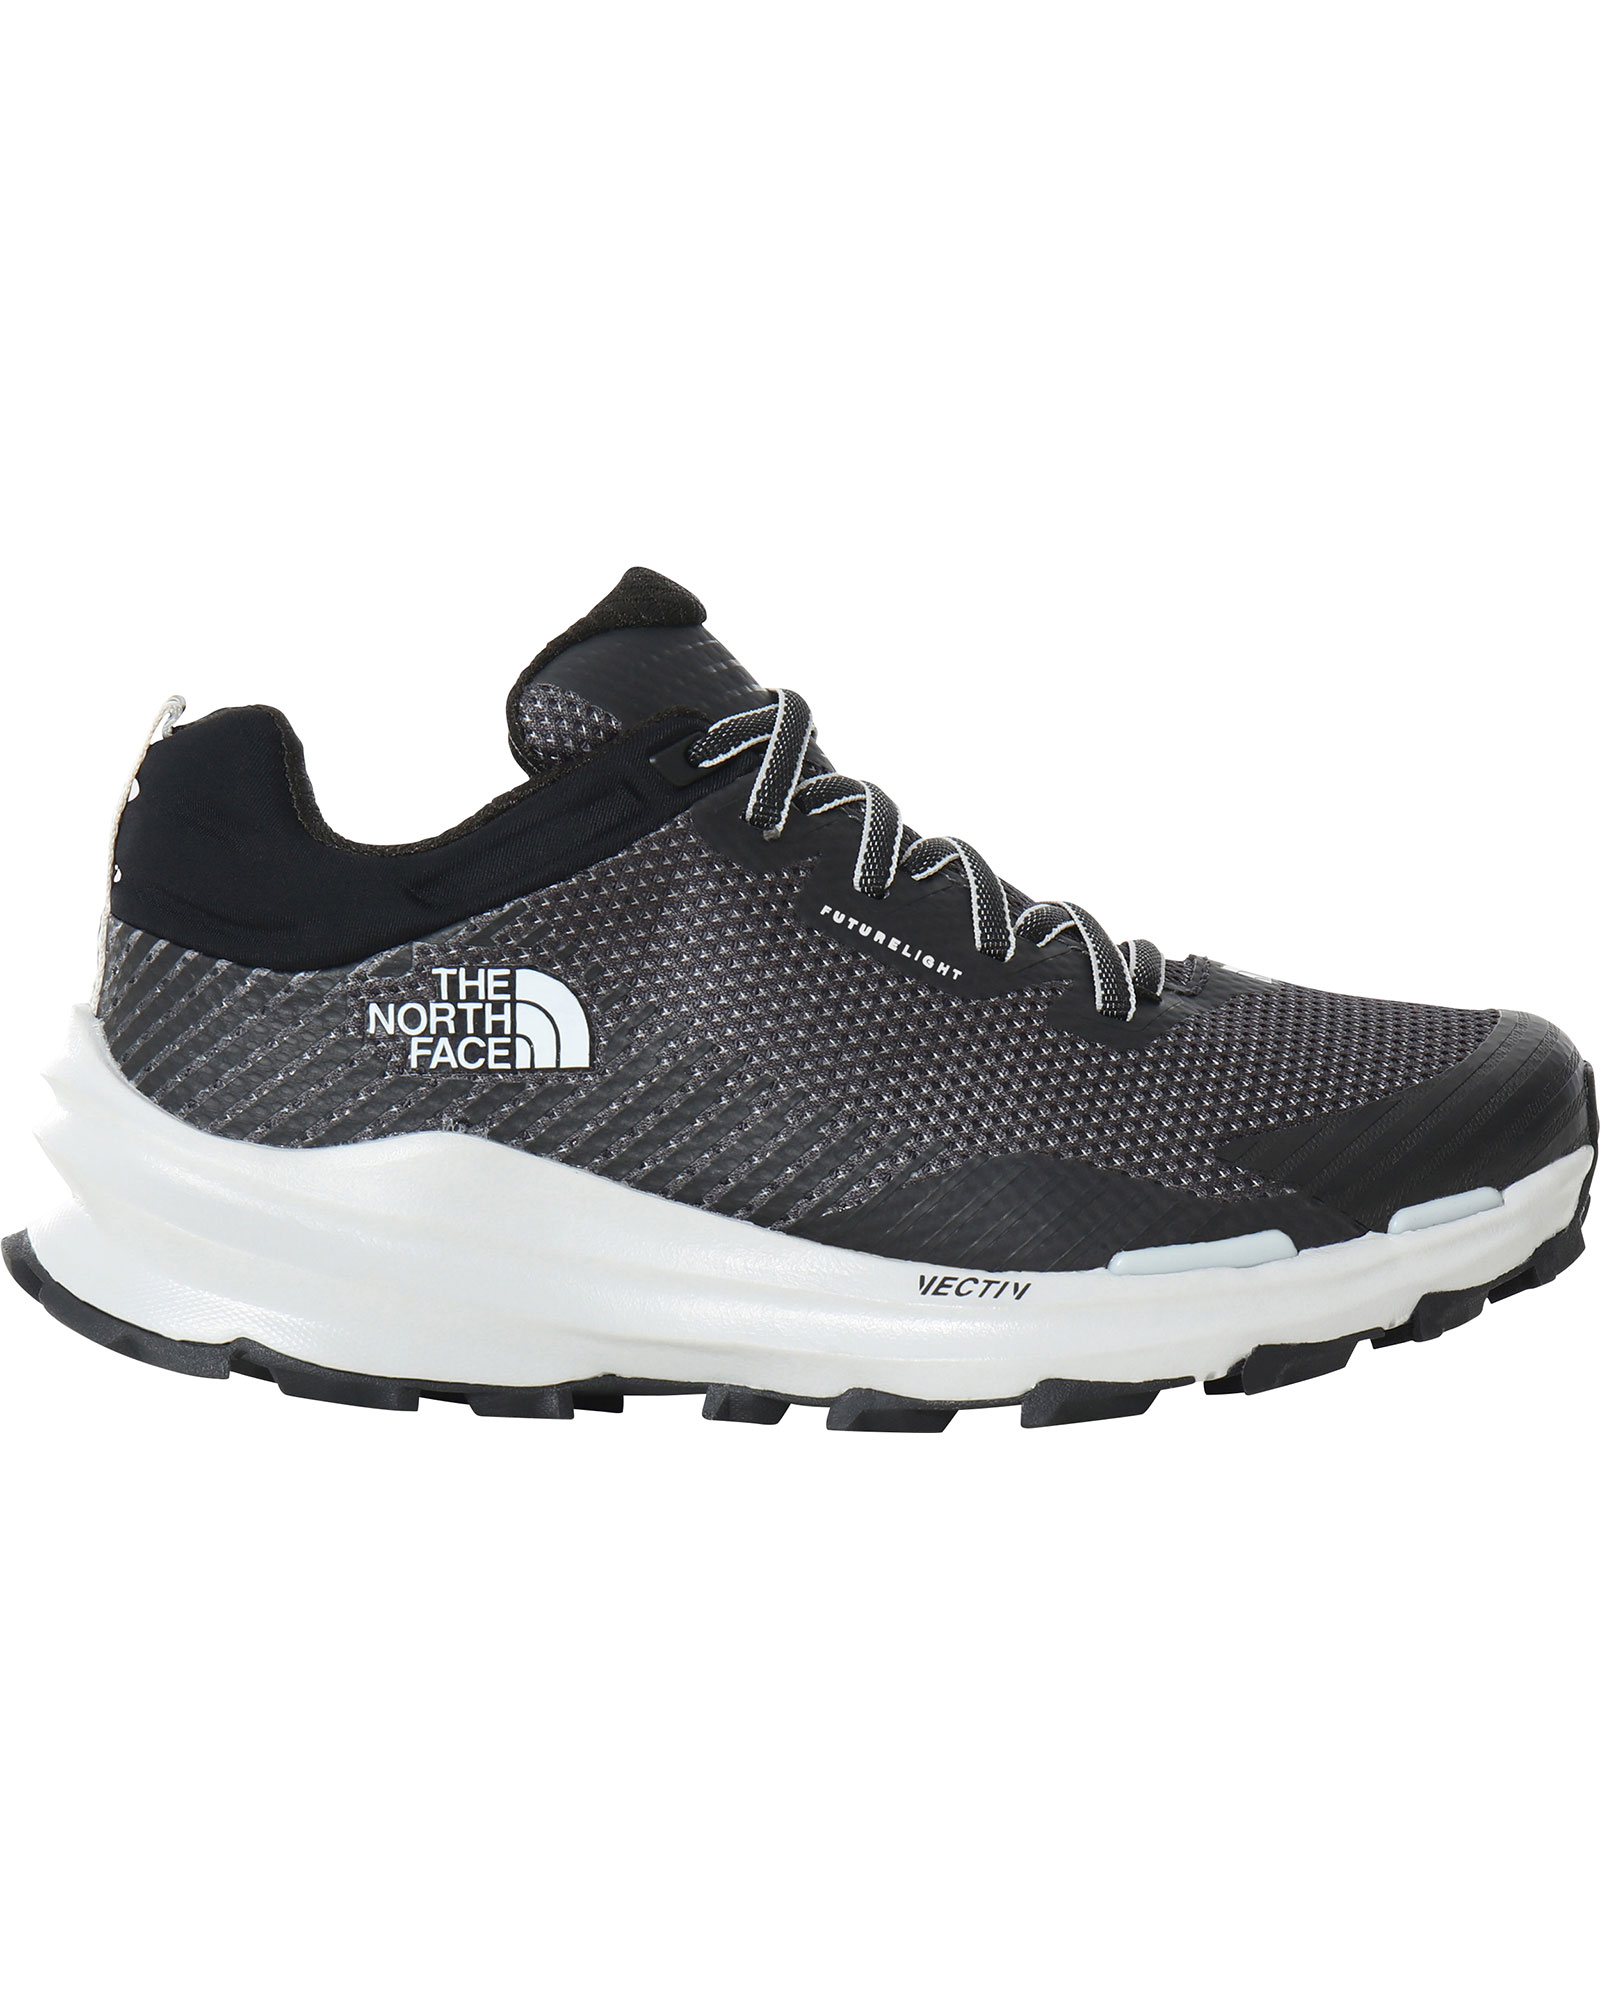 The North Face Women's Vectiv Fastpack FUTURELIGHT Shoes